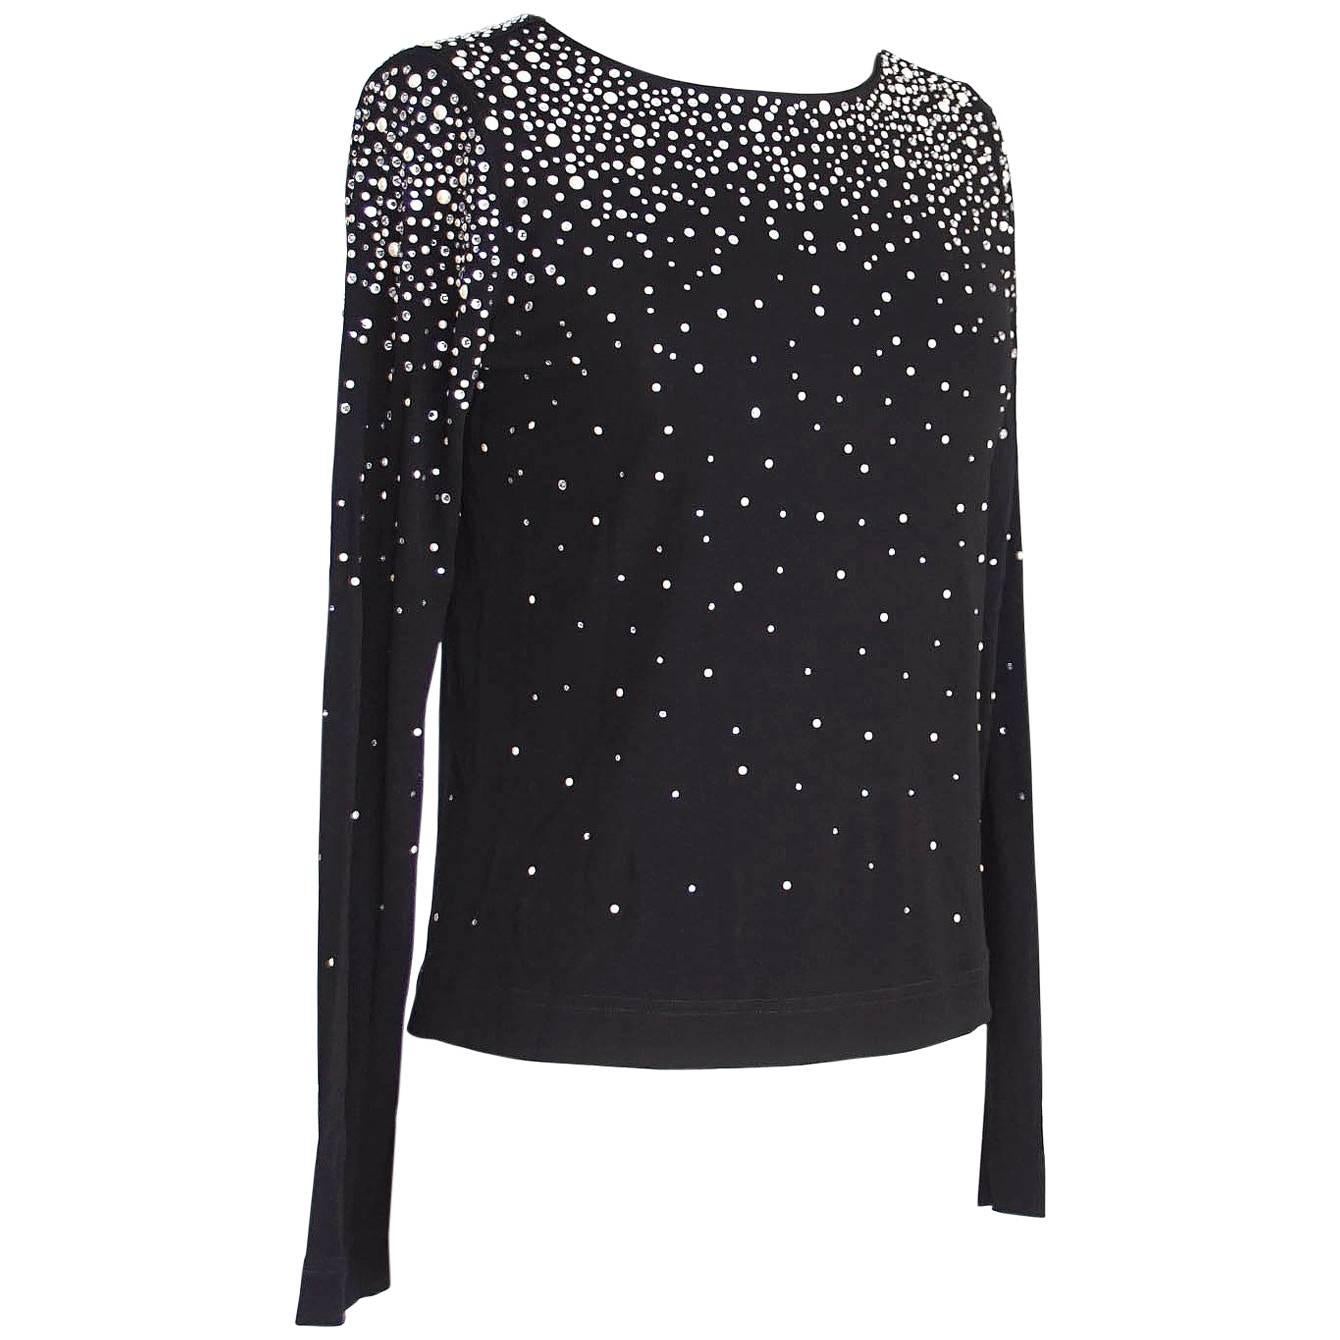 Guaranteed authentic Dolce&Gabbana gorgeous black top encrusted with pearl and Swarovski diamante crystals.
Gentle boat neckline.
Upper shoulders are encrusted with varying sizes of pearls and diamantes.
The body and sleeves have a scattering of